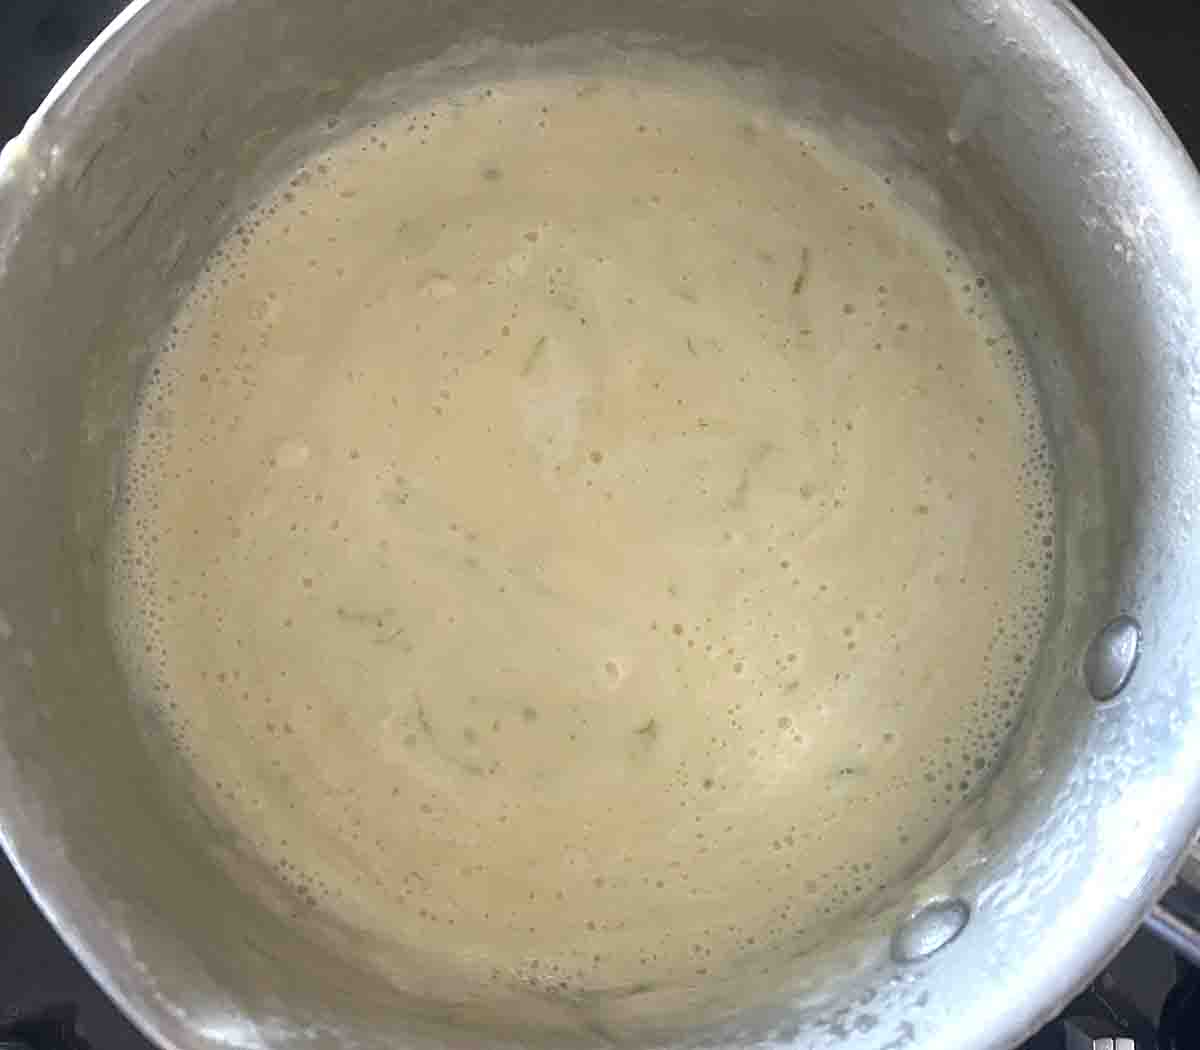 crema with lime added.